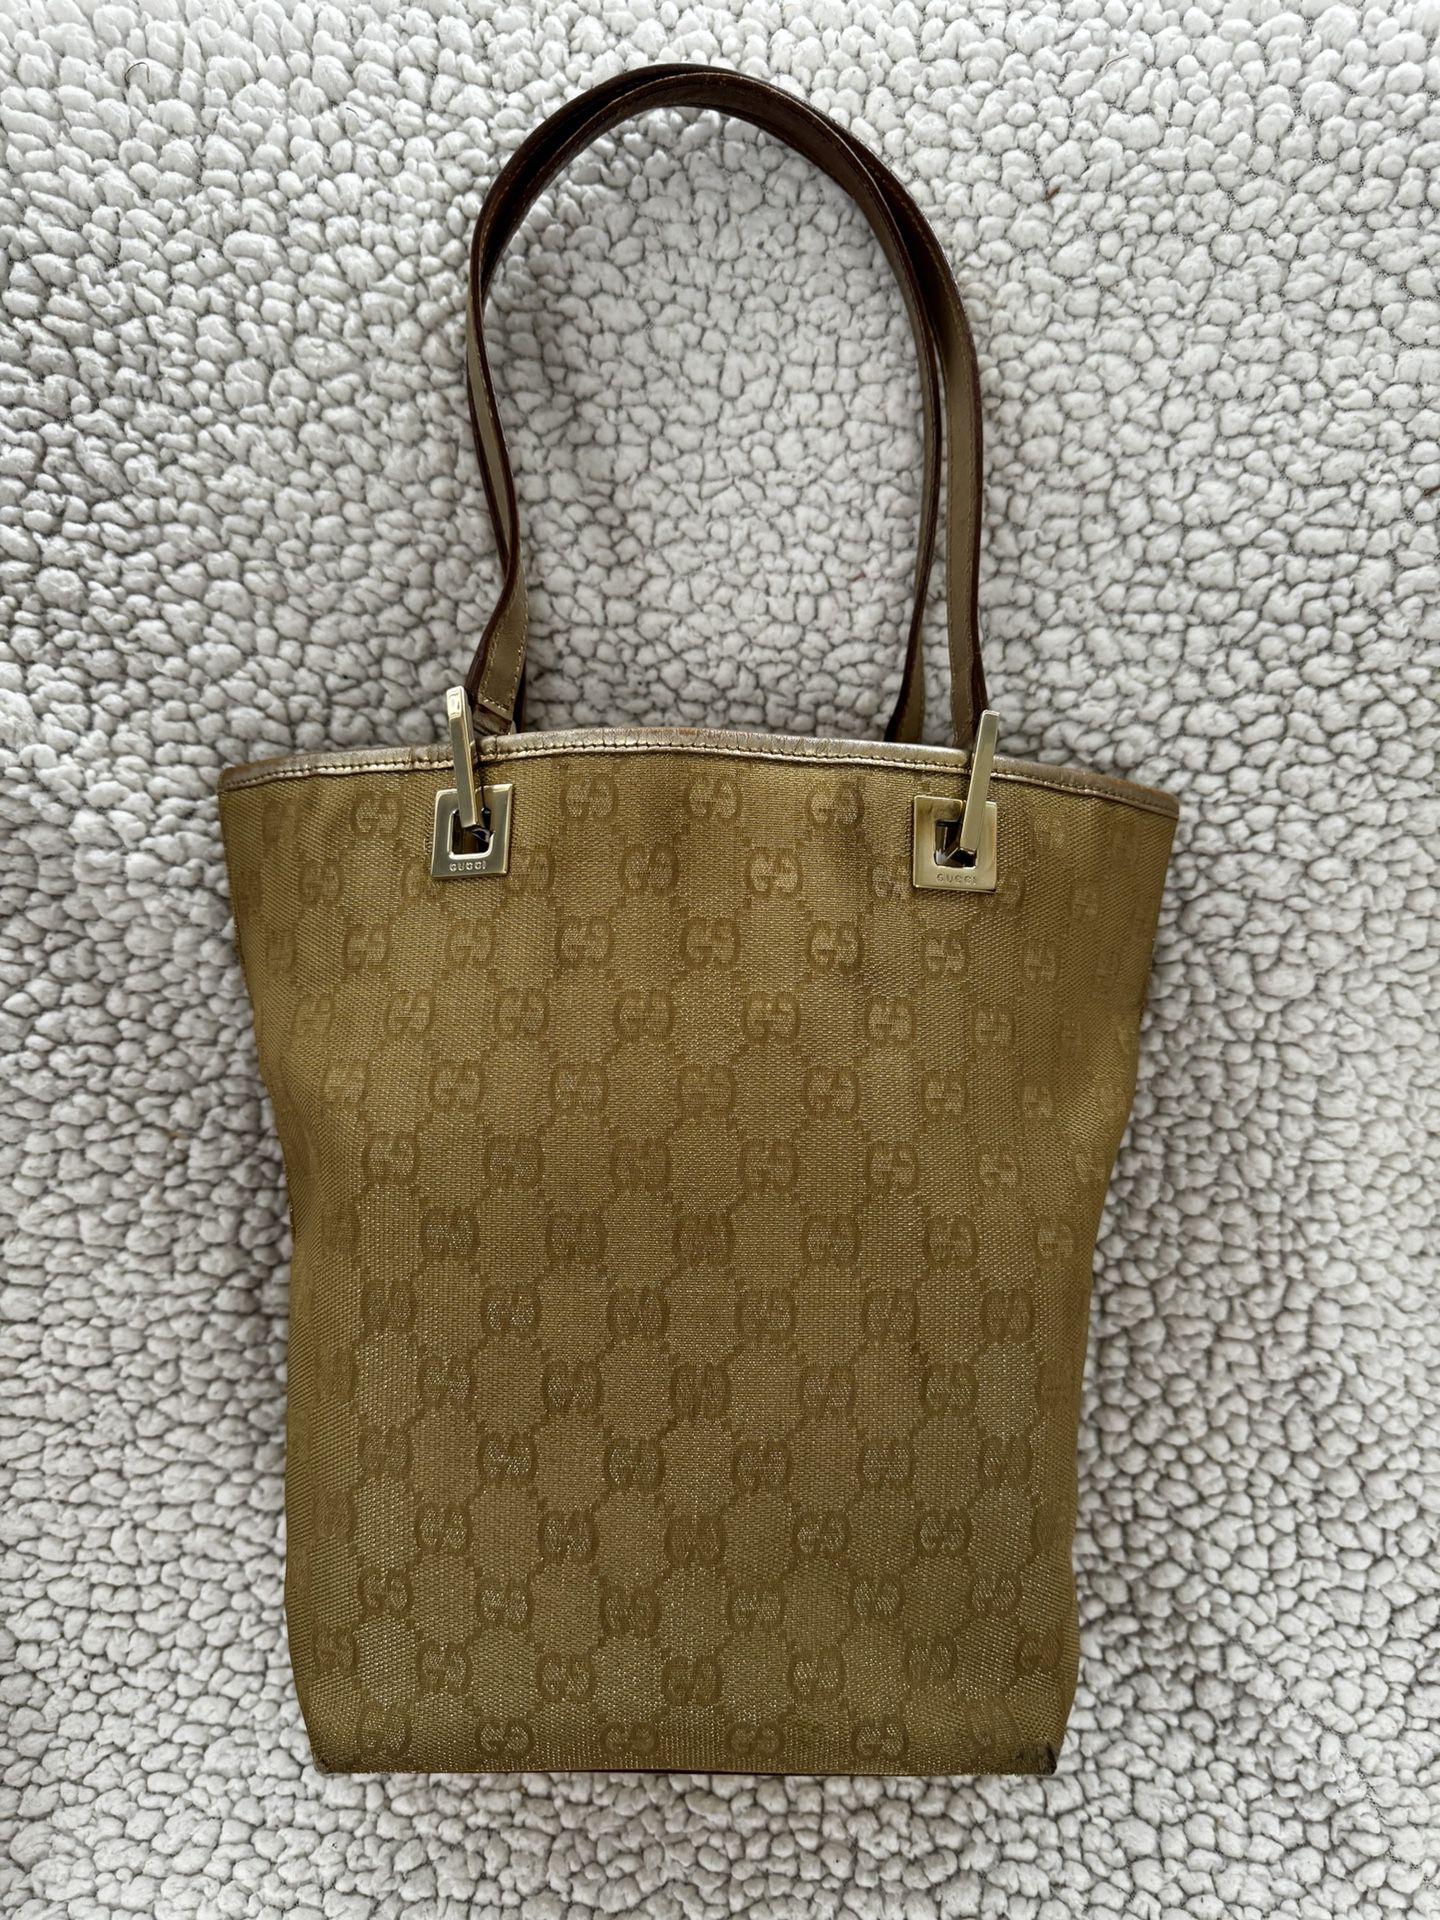 AUTHENTIC Gucci Gold GG Canvas and Leather Tote